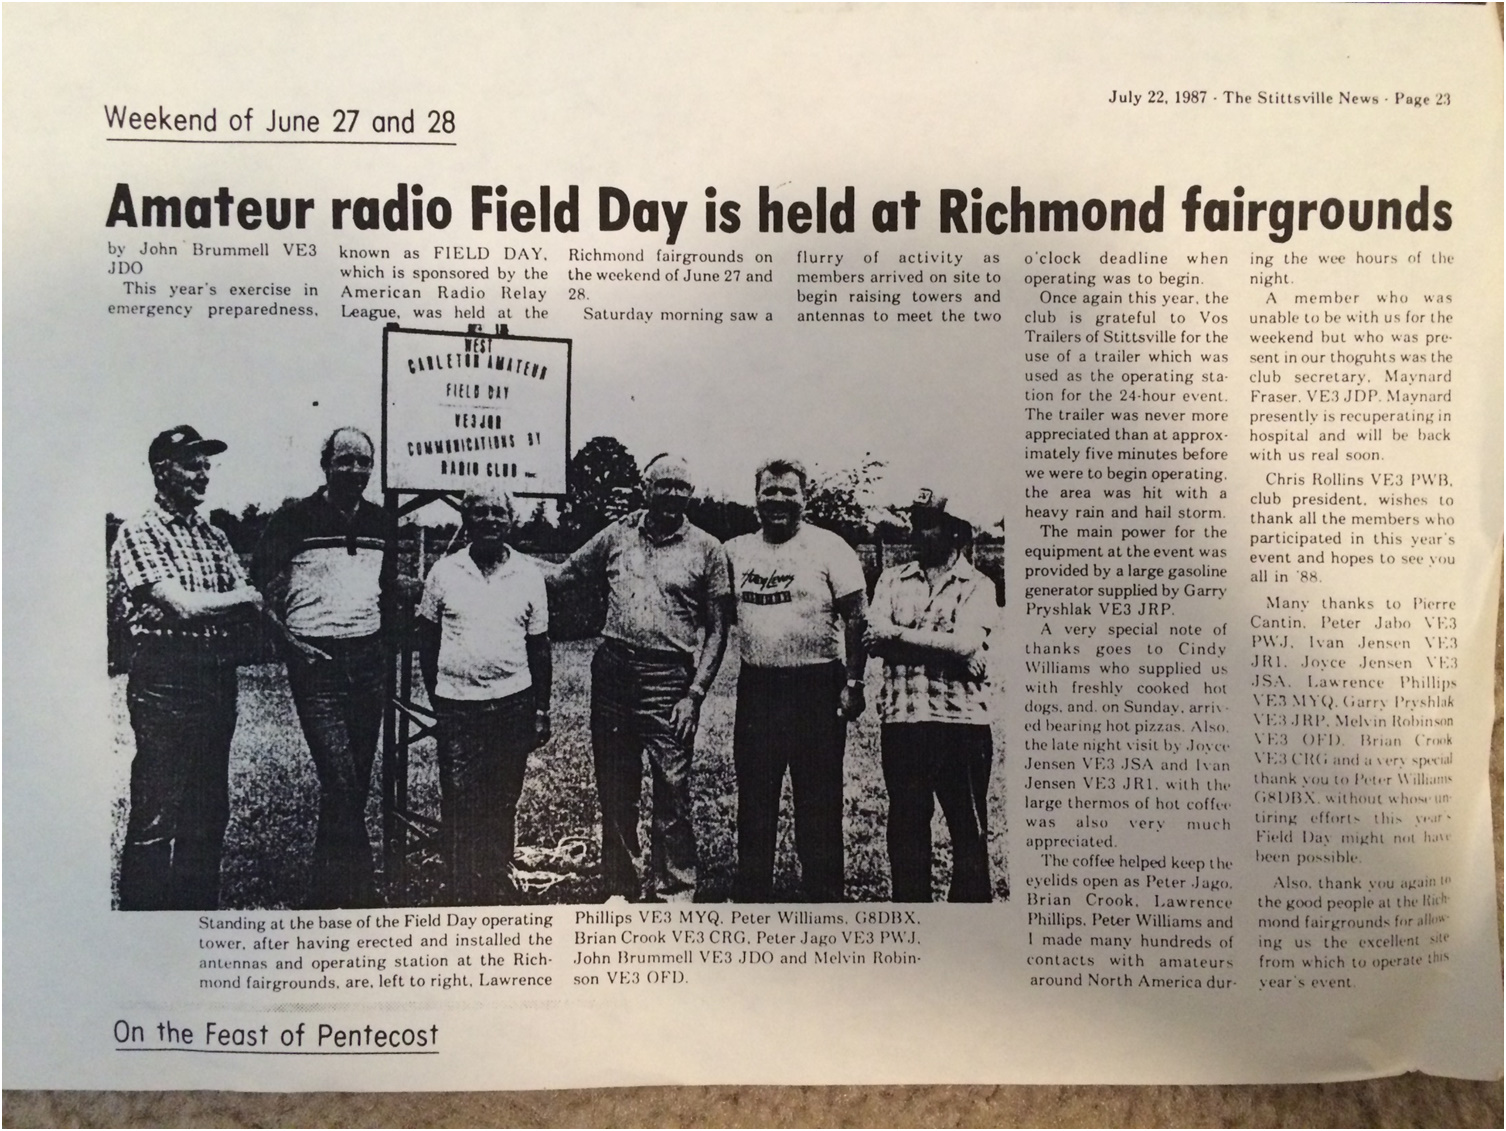 "Amateur radio Field Day is held at Richmond fairgrounds" from the Stittsville News, July 22, 1987